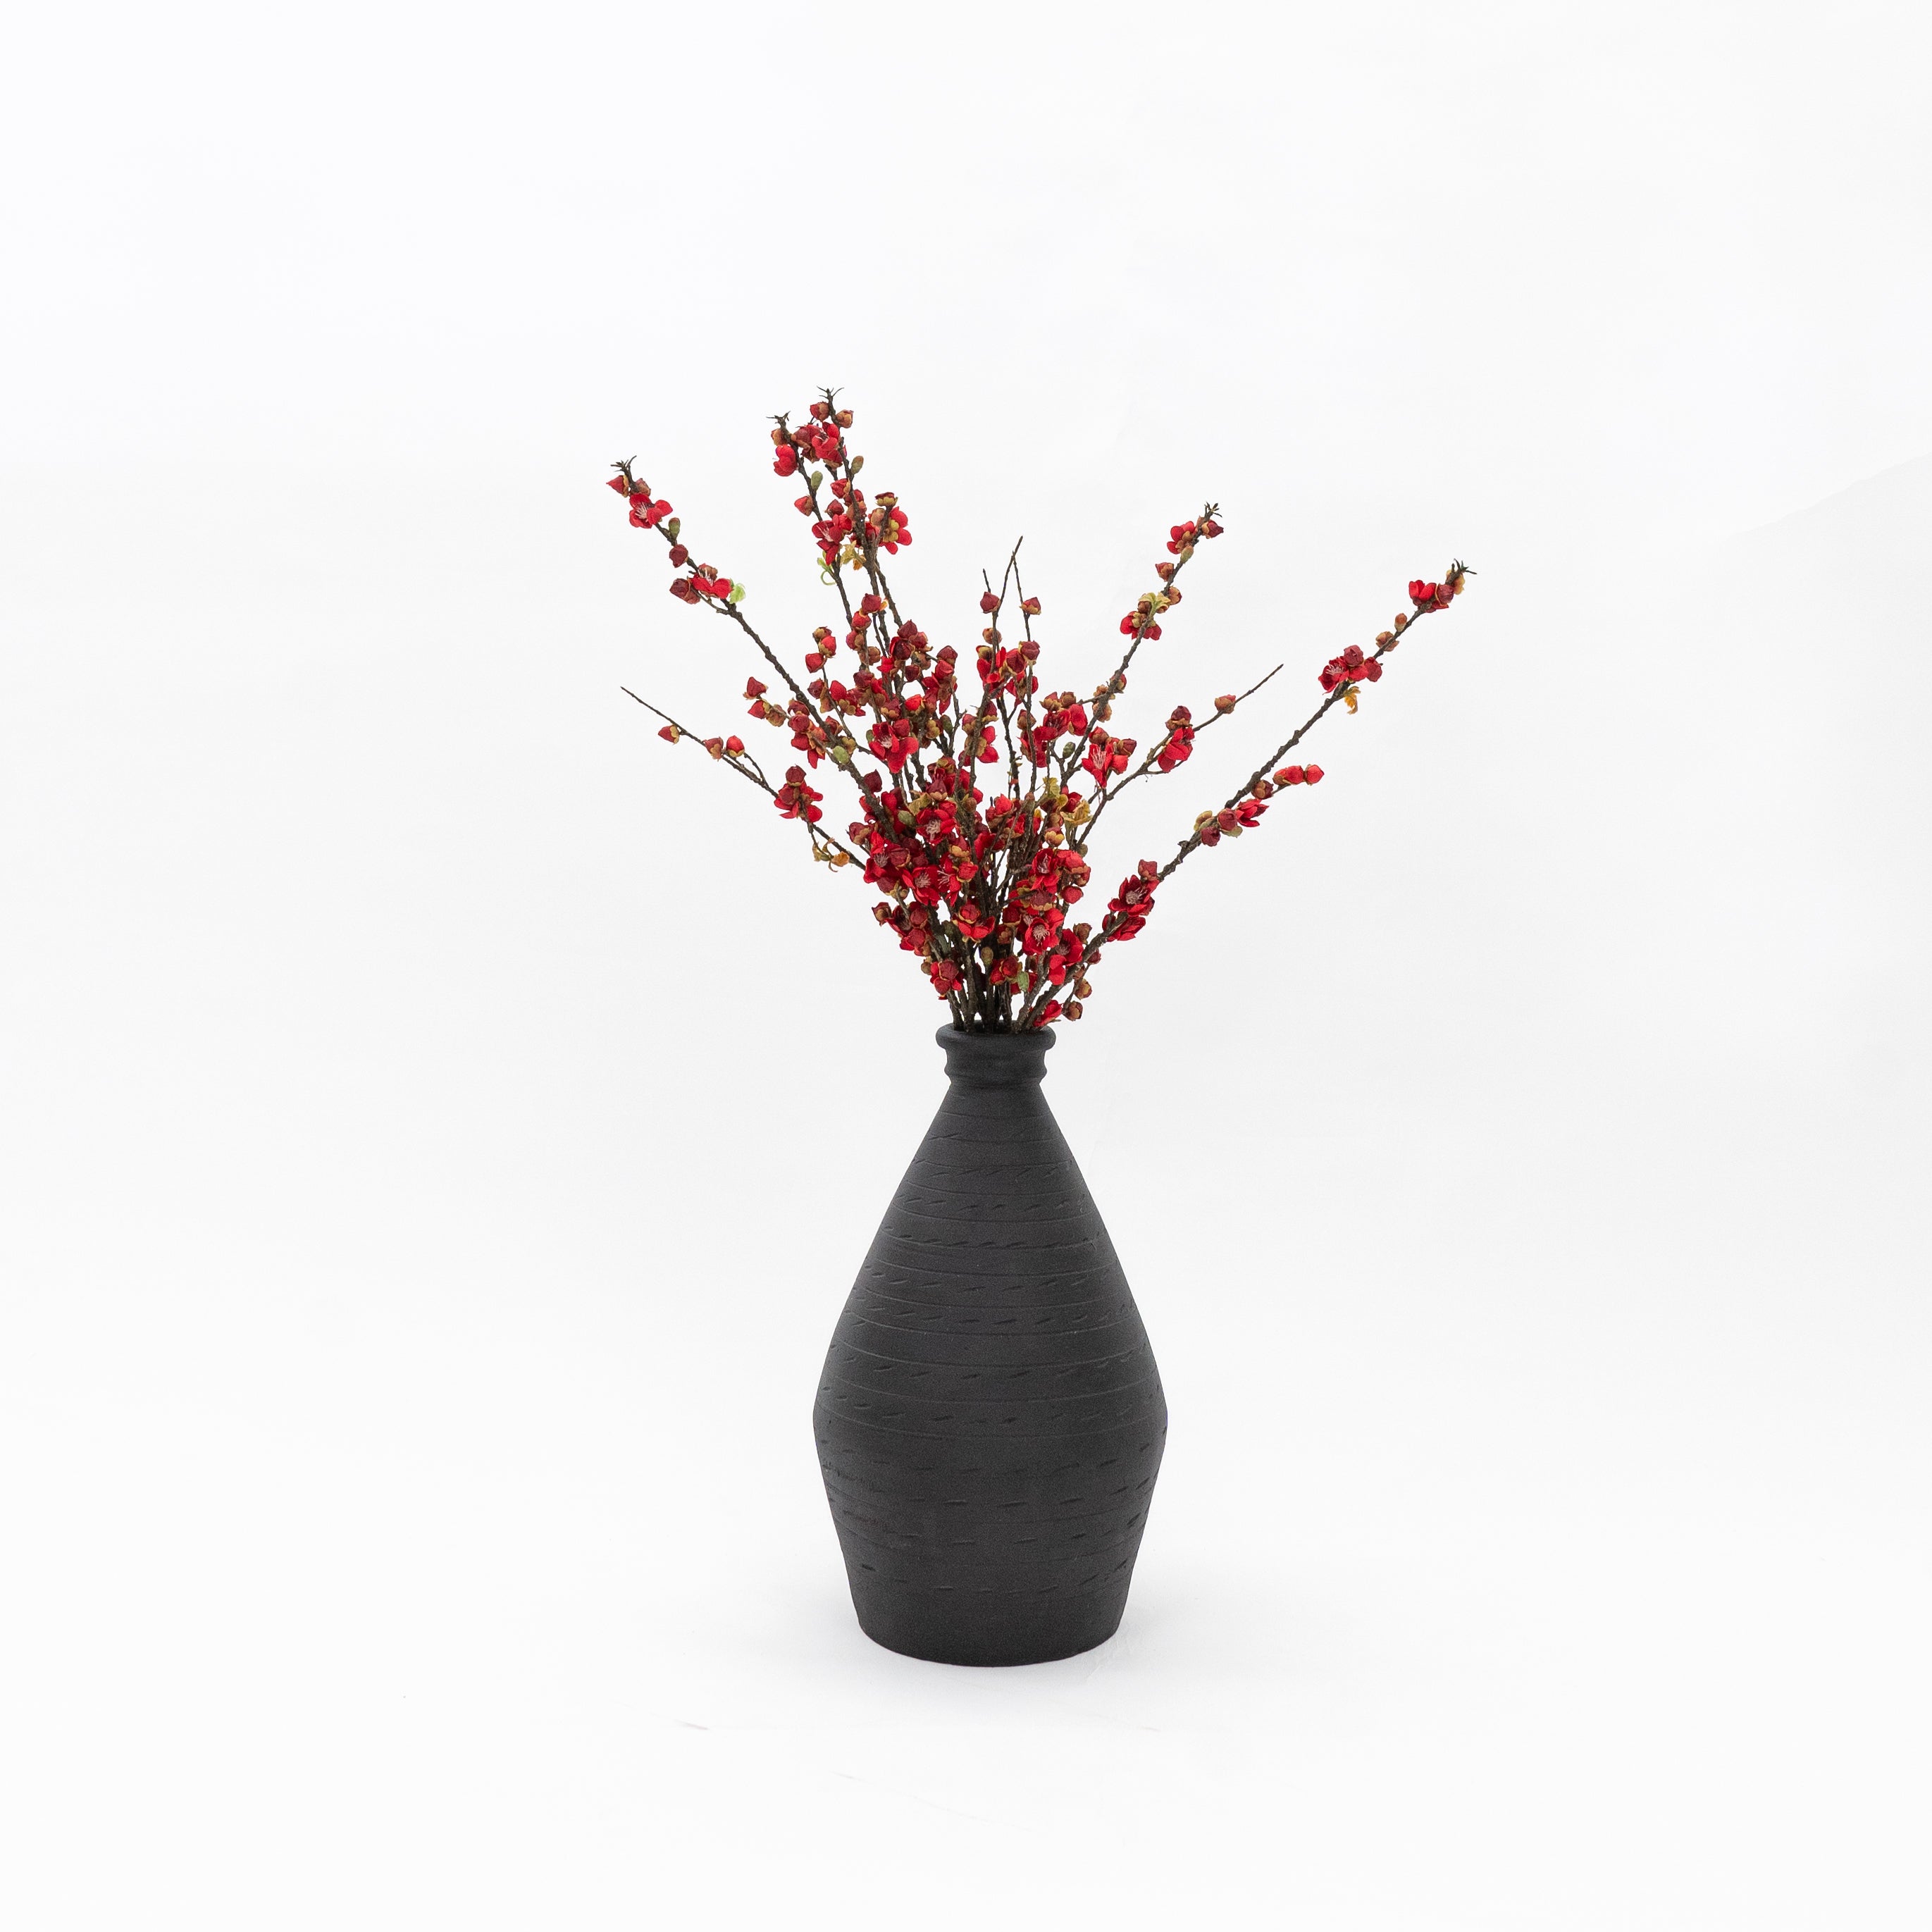 Artificial Plant - Cherry Blossom Red  - WS Living - UAE - Artificial Flowers Wood and steel Furnitures - Dubai